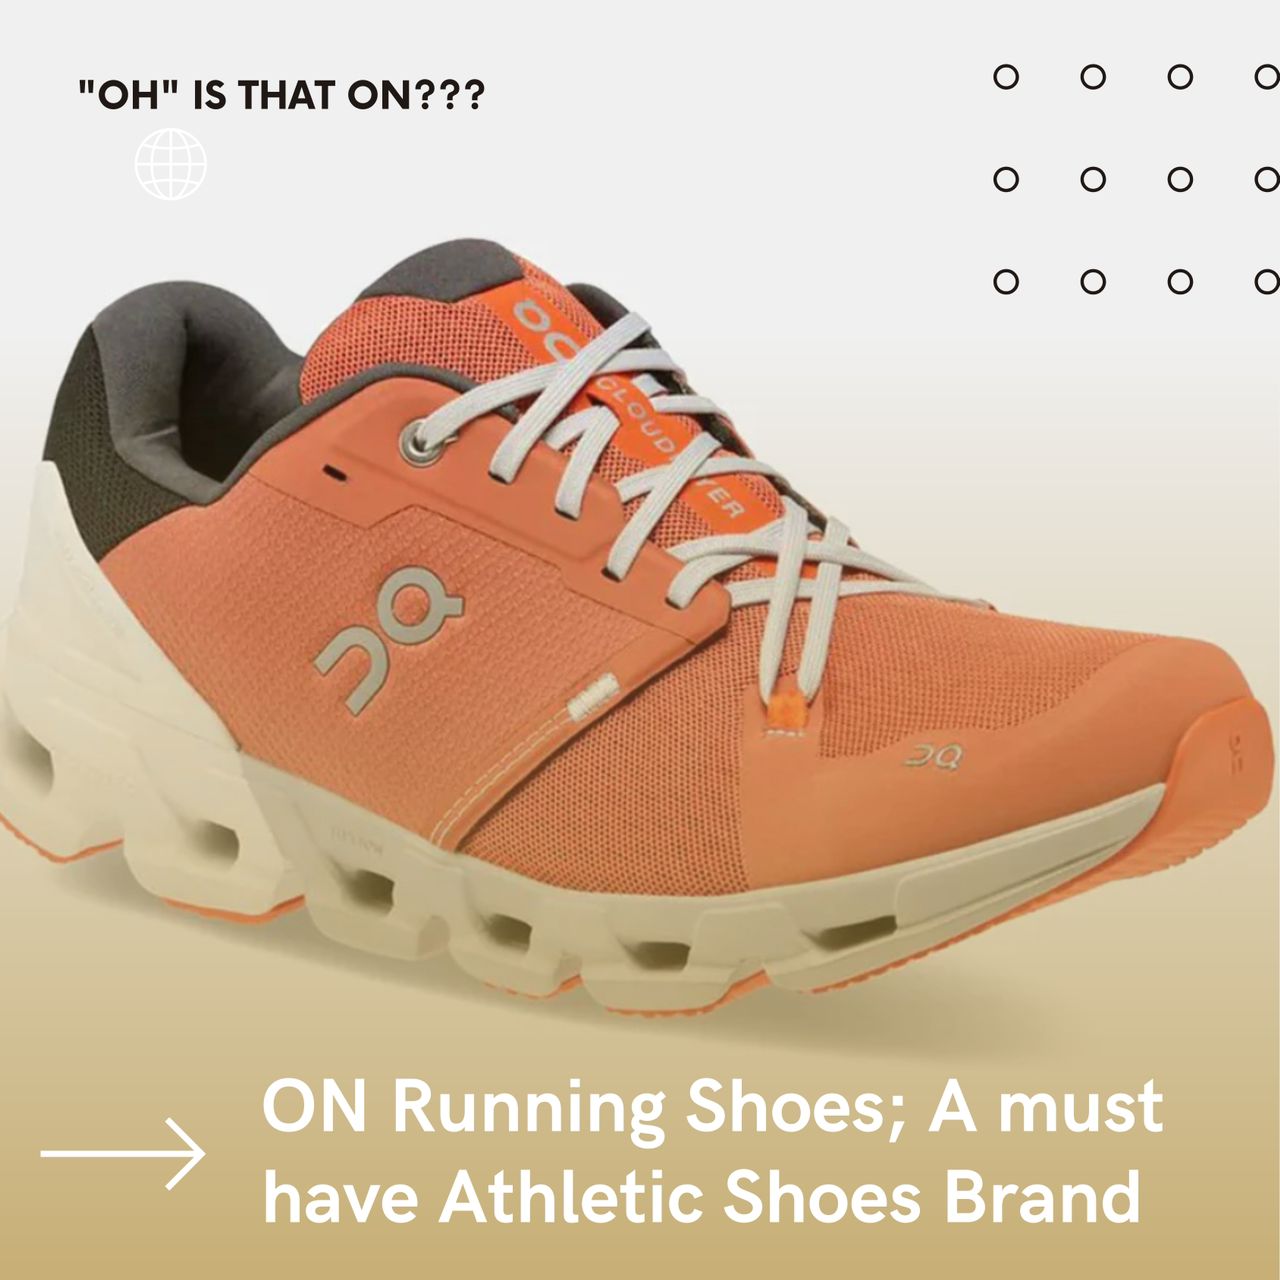 ON Running Shoes - A must have Athletic Shoes Brand